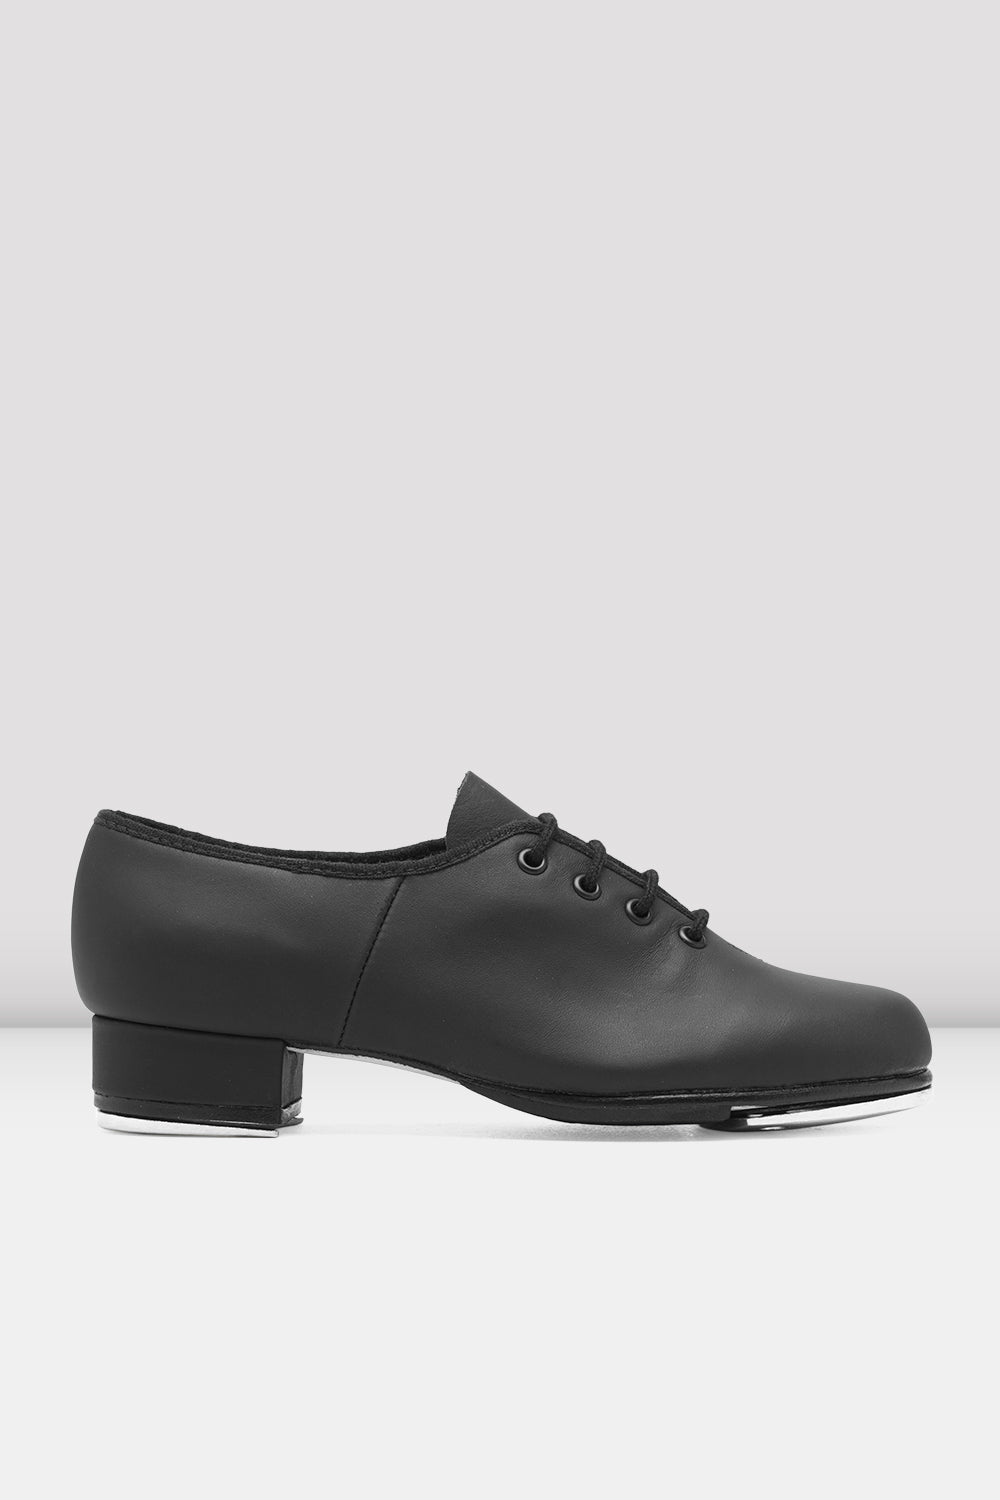 BLOCH Childrens Jazz Tap Leather Tap Shoes, Black Leather